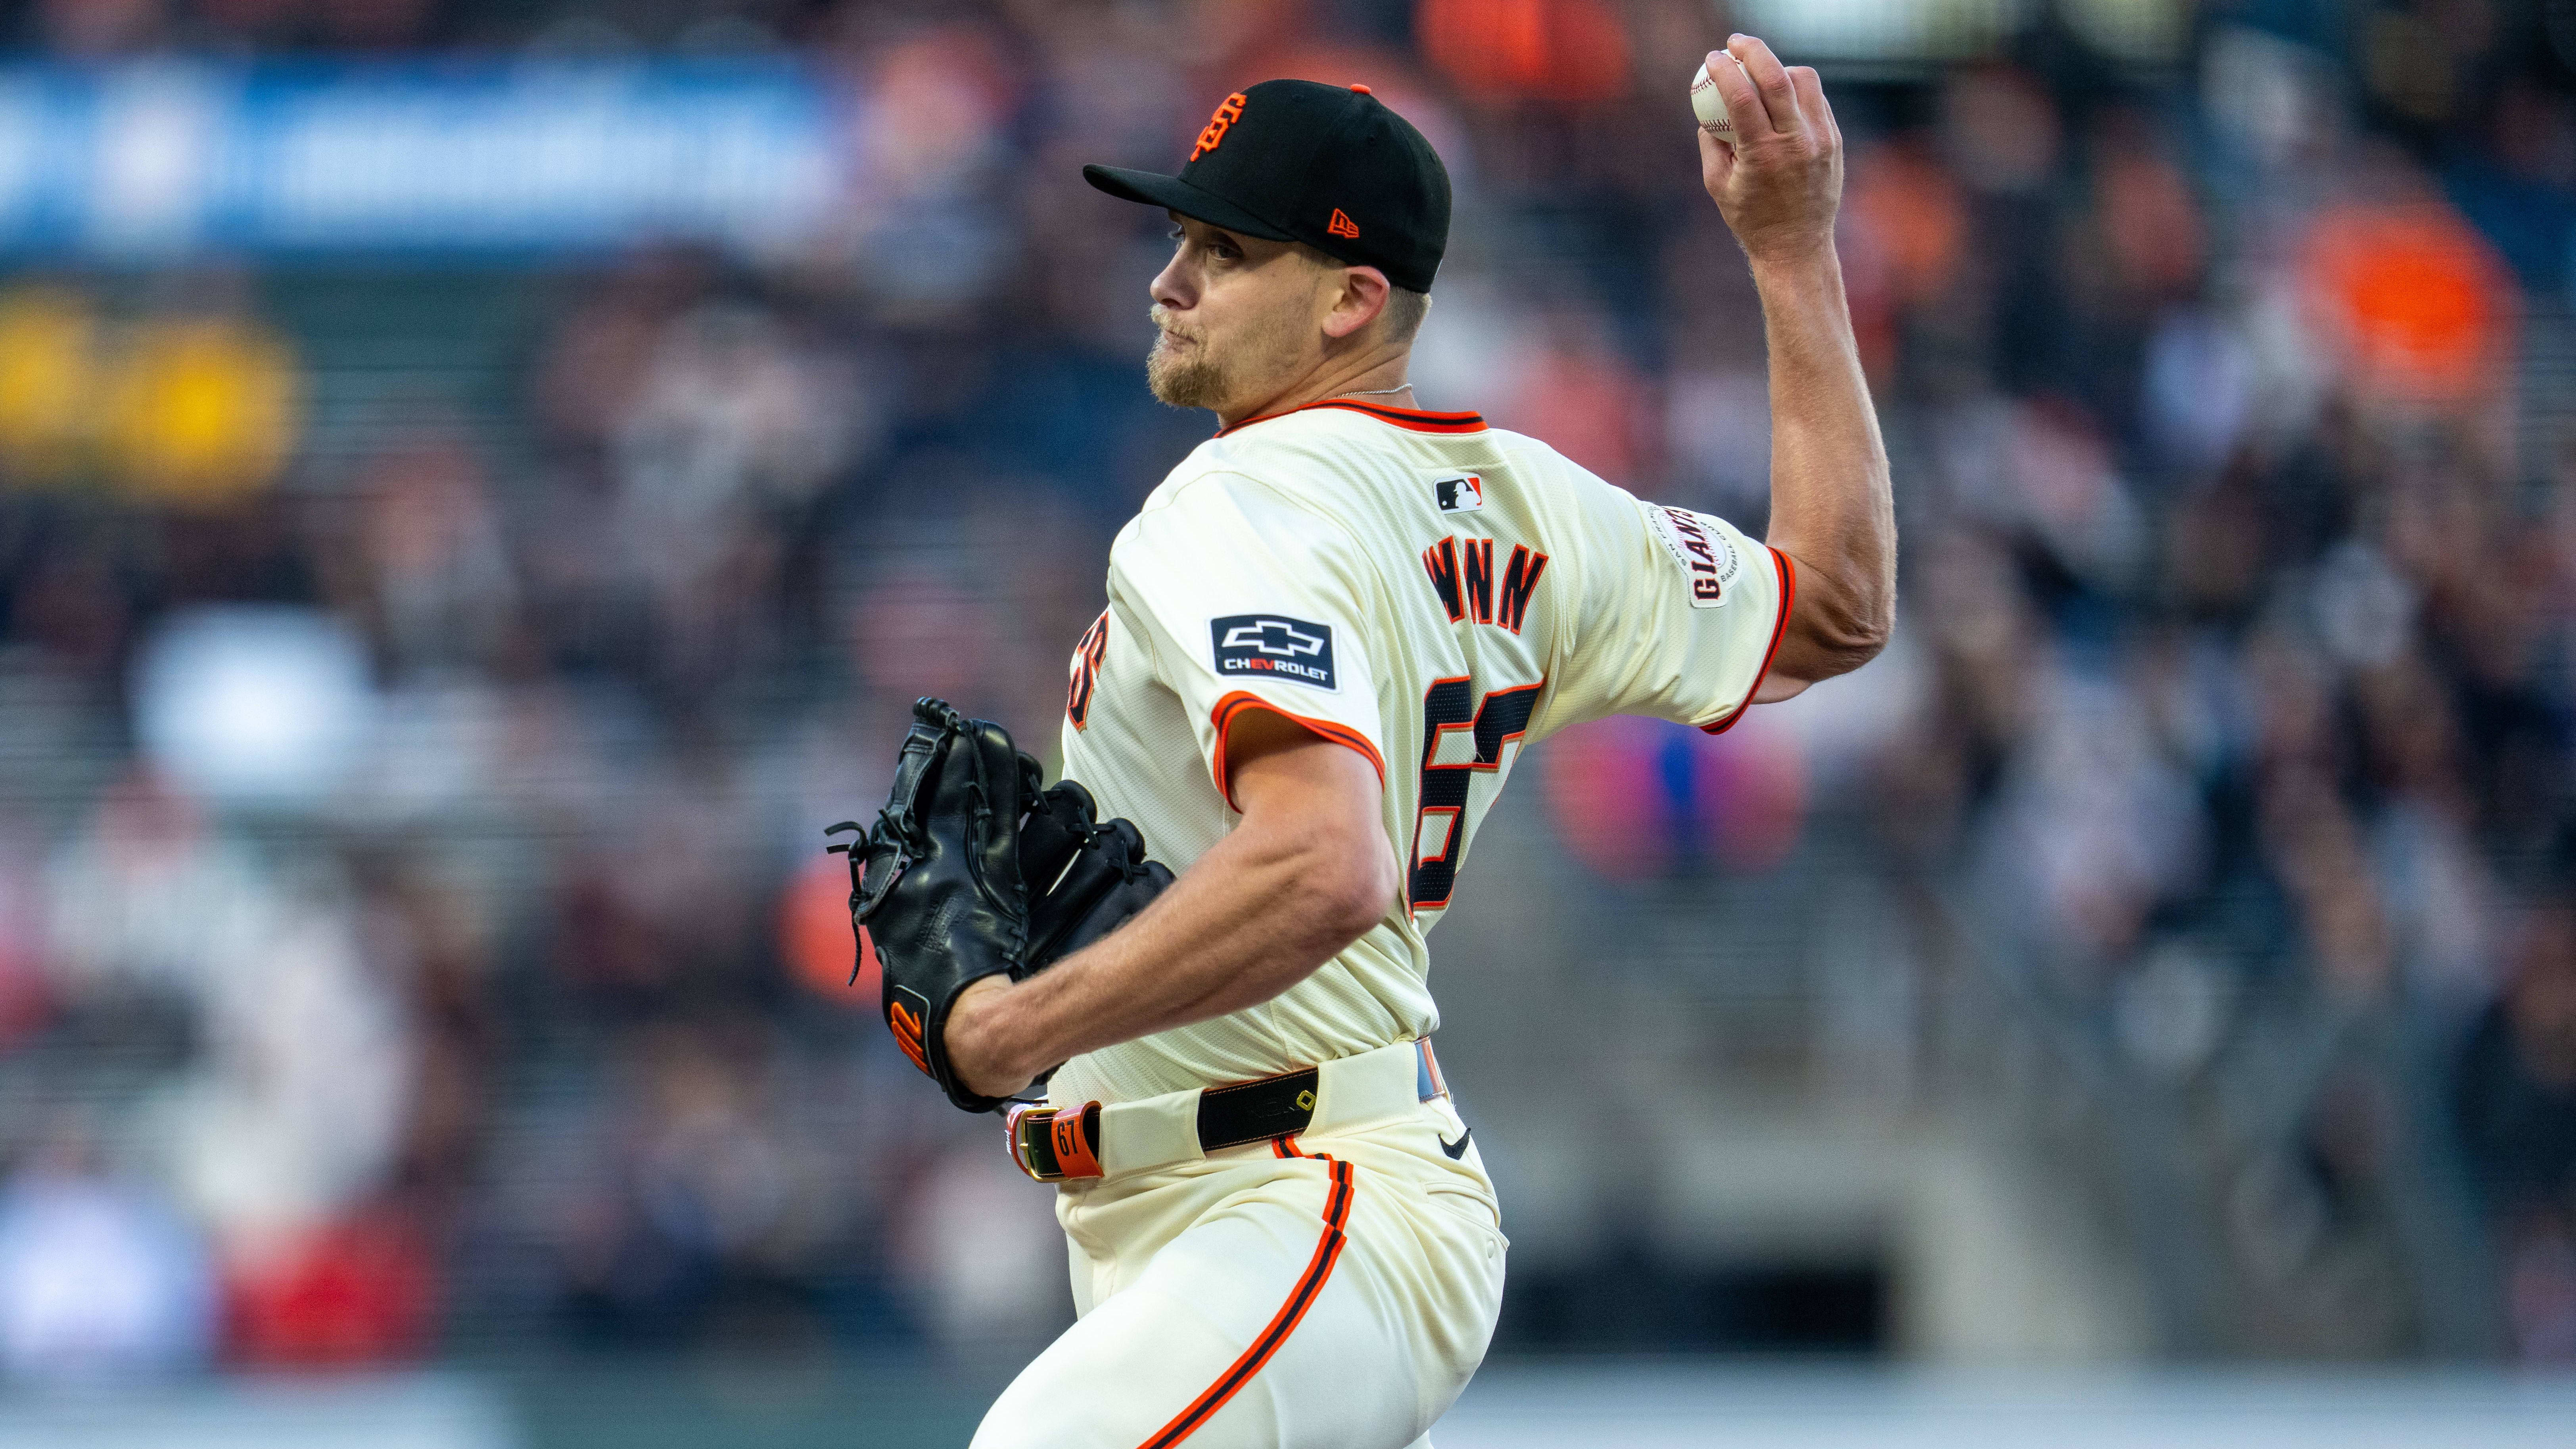 San Francisco Giants' Former Unheralded Pitcher Continues To Shine This Season